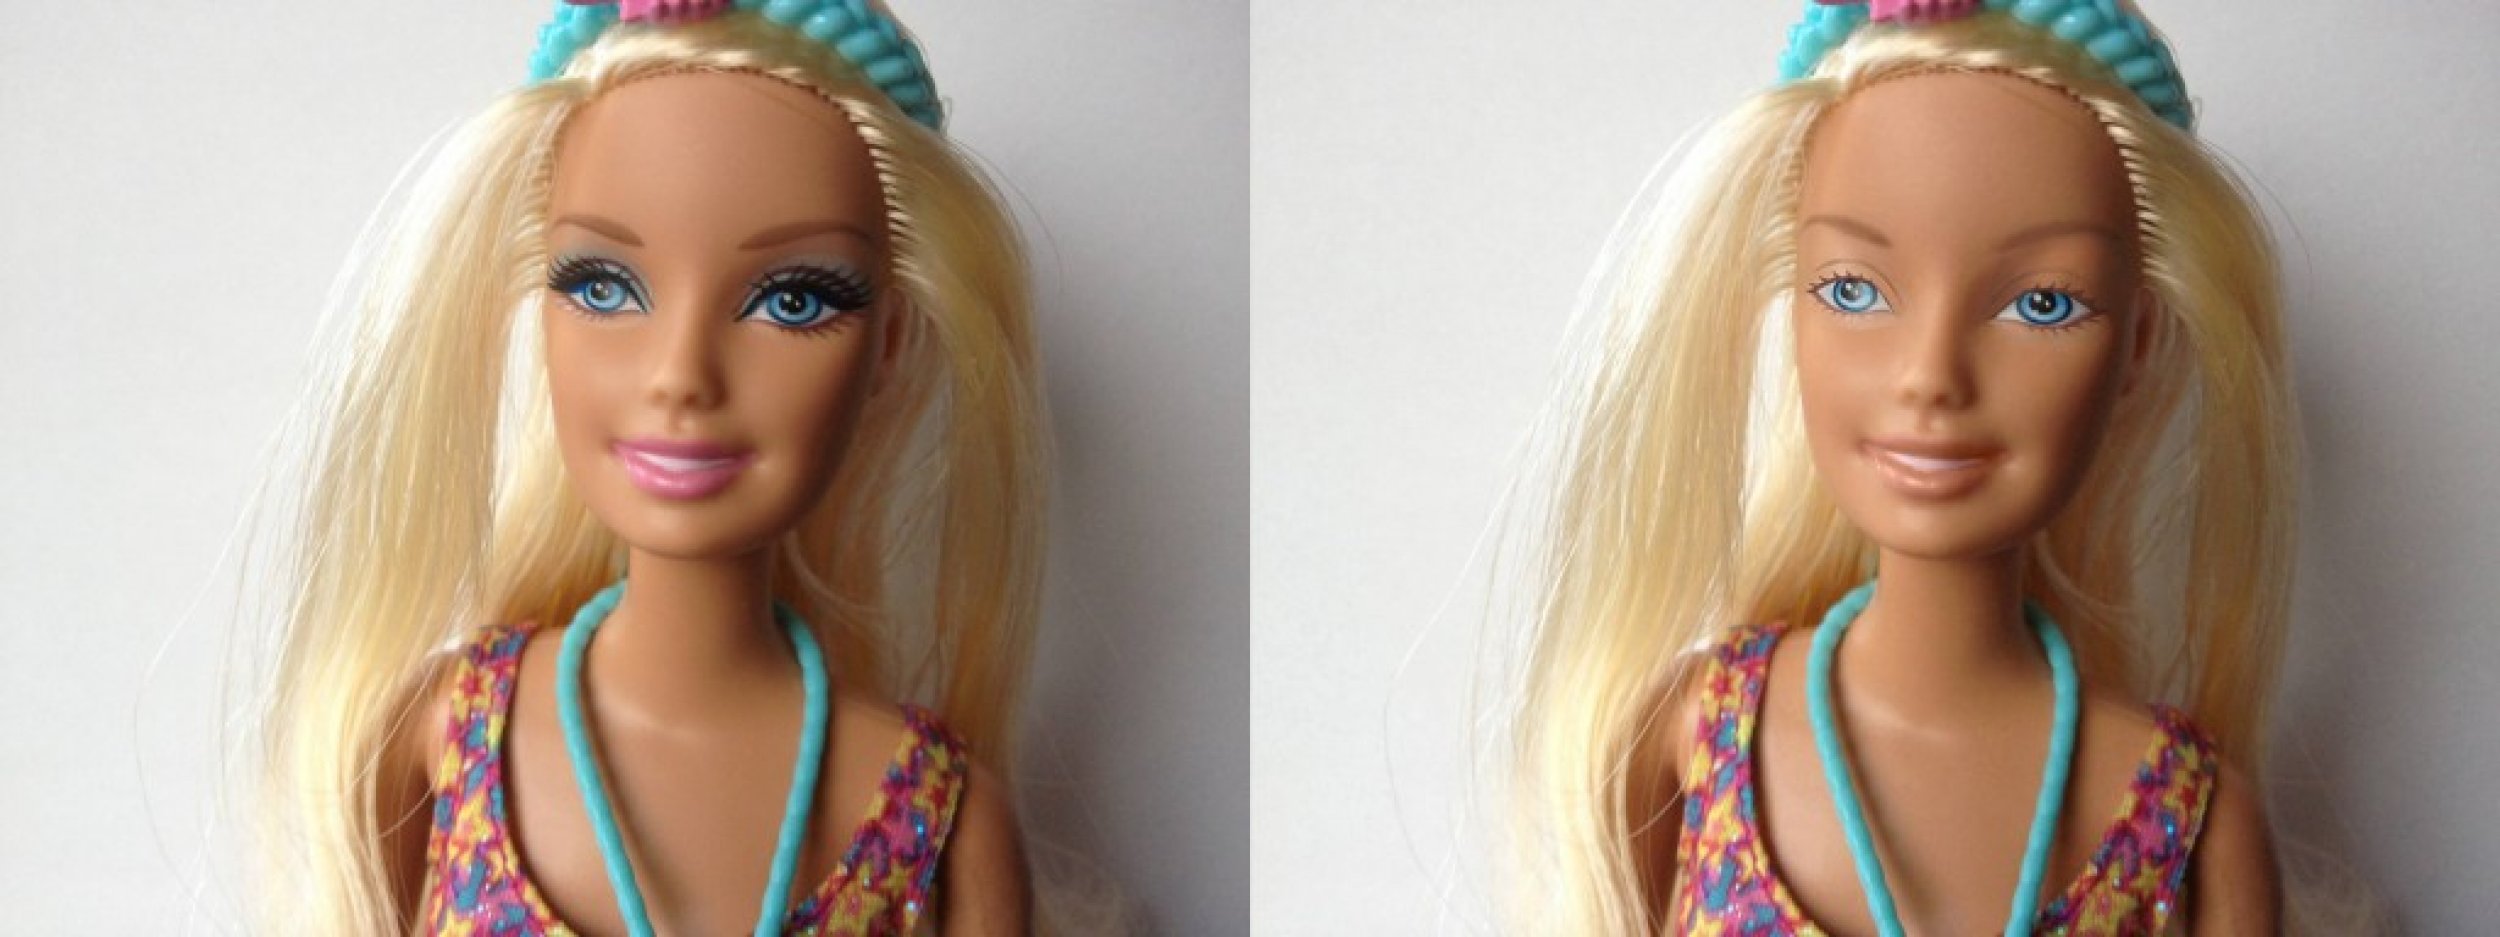 lugt svømme Primitiv Barbie Without Makeup: Nickolay Lamm's Images Go Viral, Raise Questions On  Doll's Influence [PHOTOS]